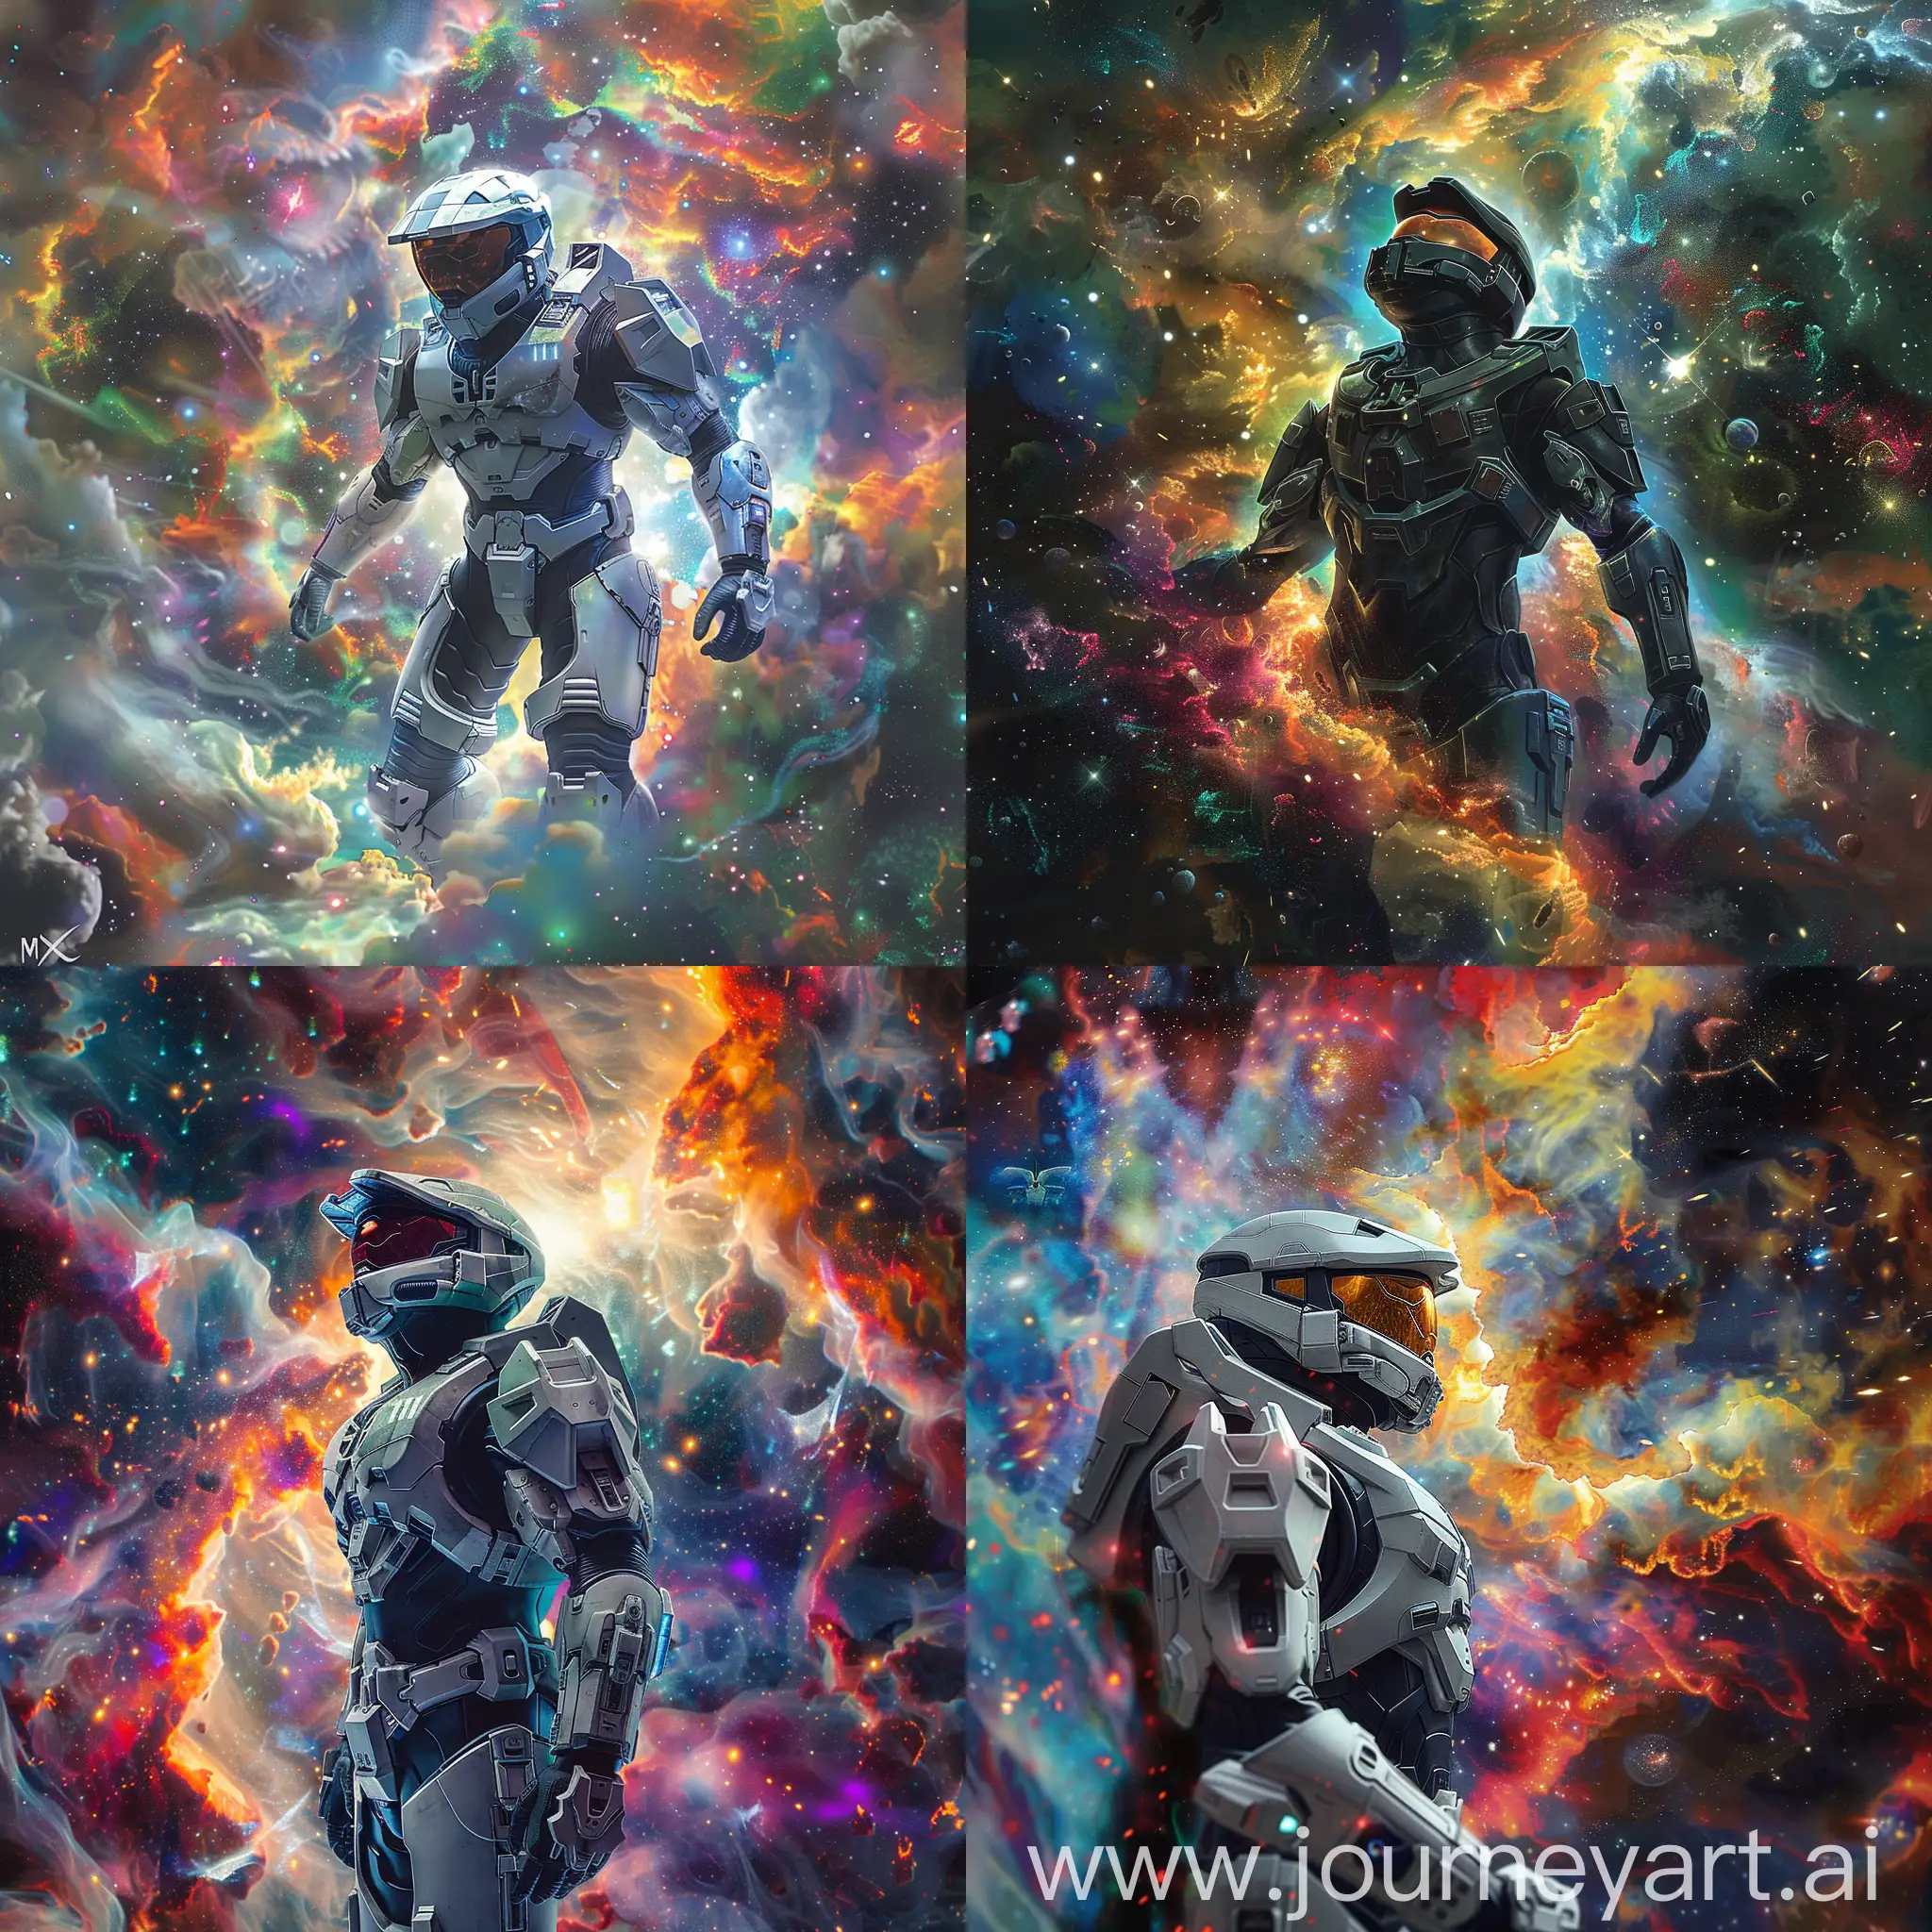 Midjourney Art Example-A creatively reimagined Halo in Space-X gear, exploring an abstract universe filled with vibrant, nebulous formations, exuding a sense of joy